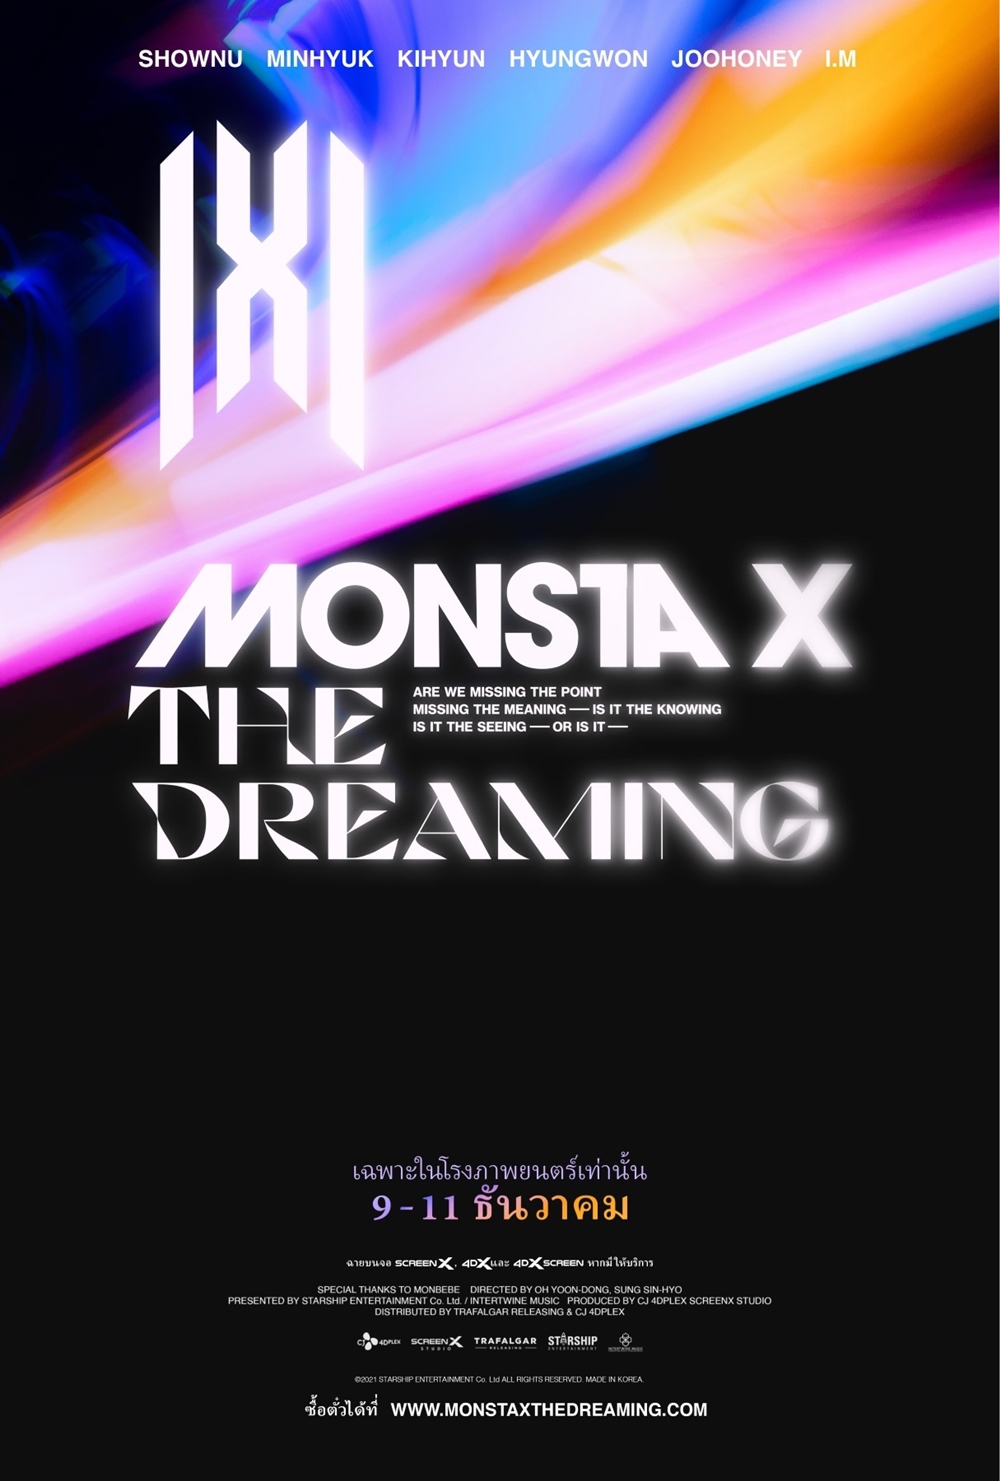 monstaxthedreamingposter